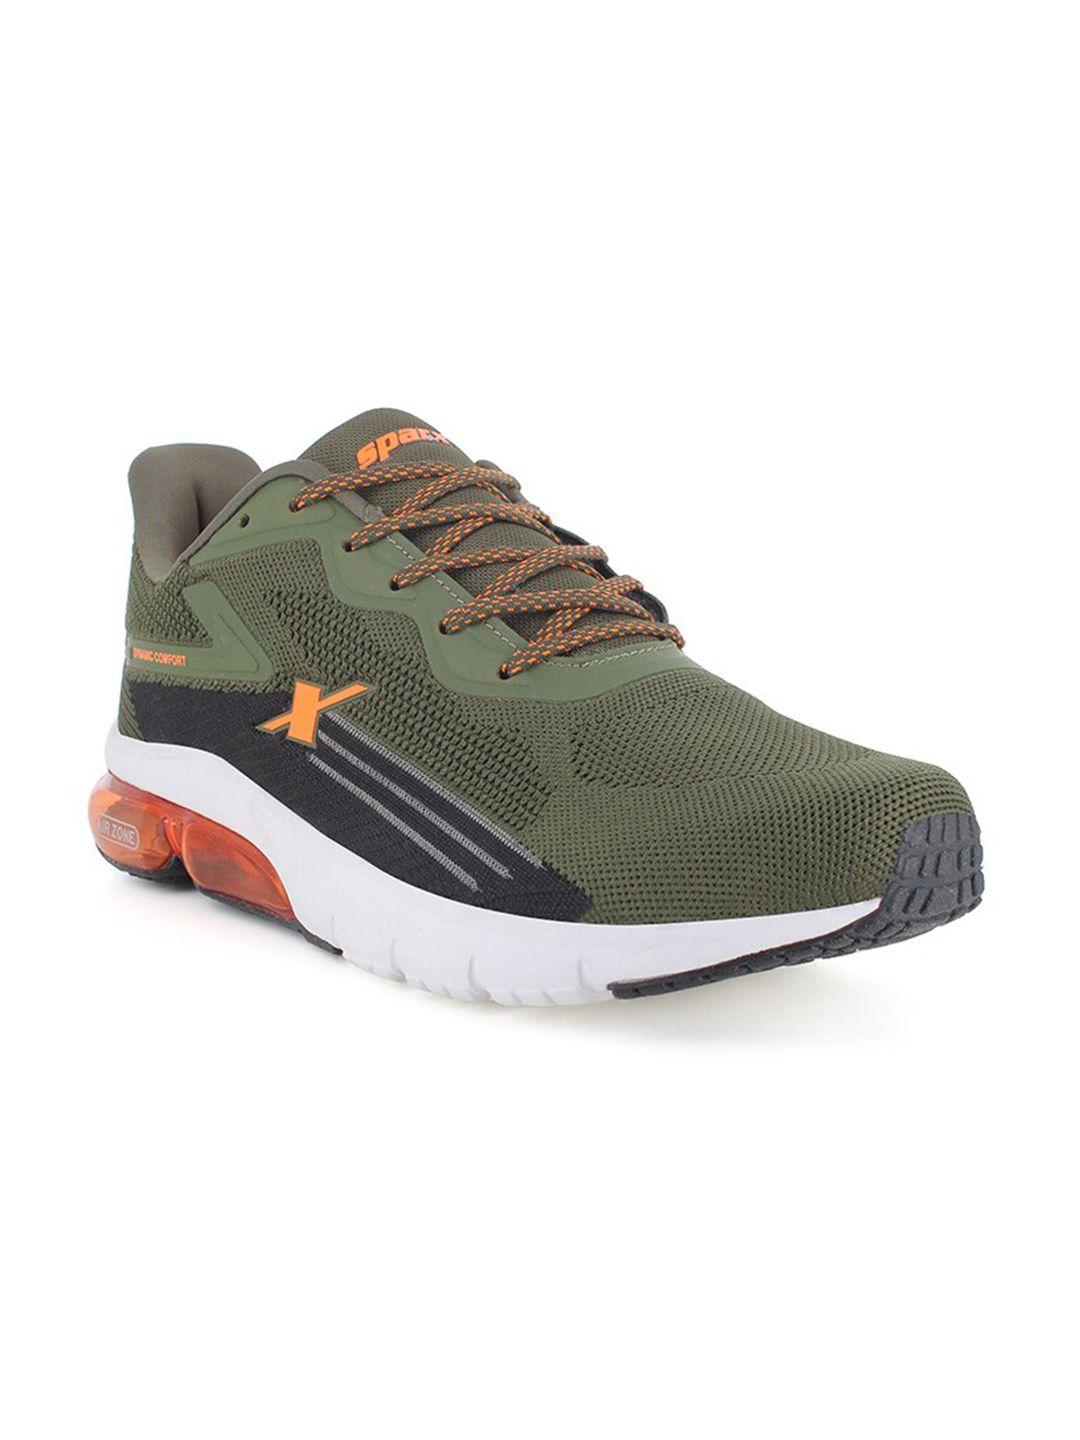 sparx men olive green textile running non-marking shoes